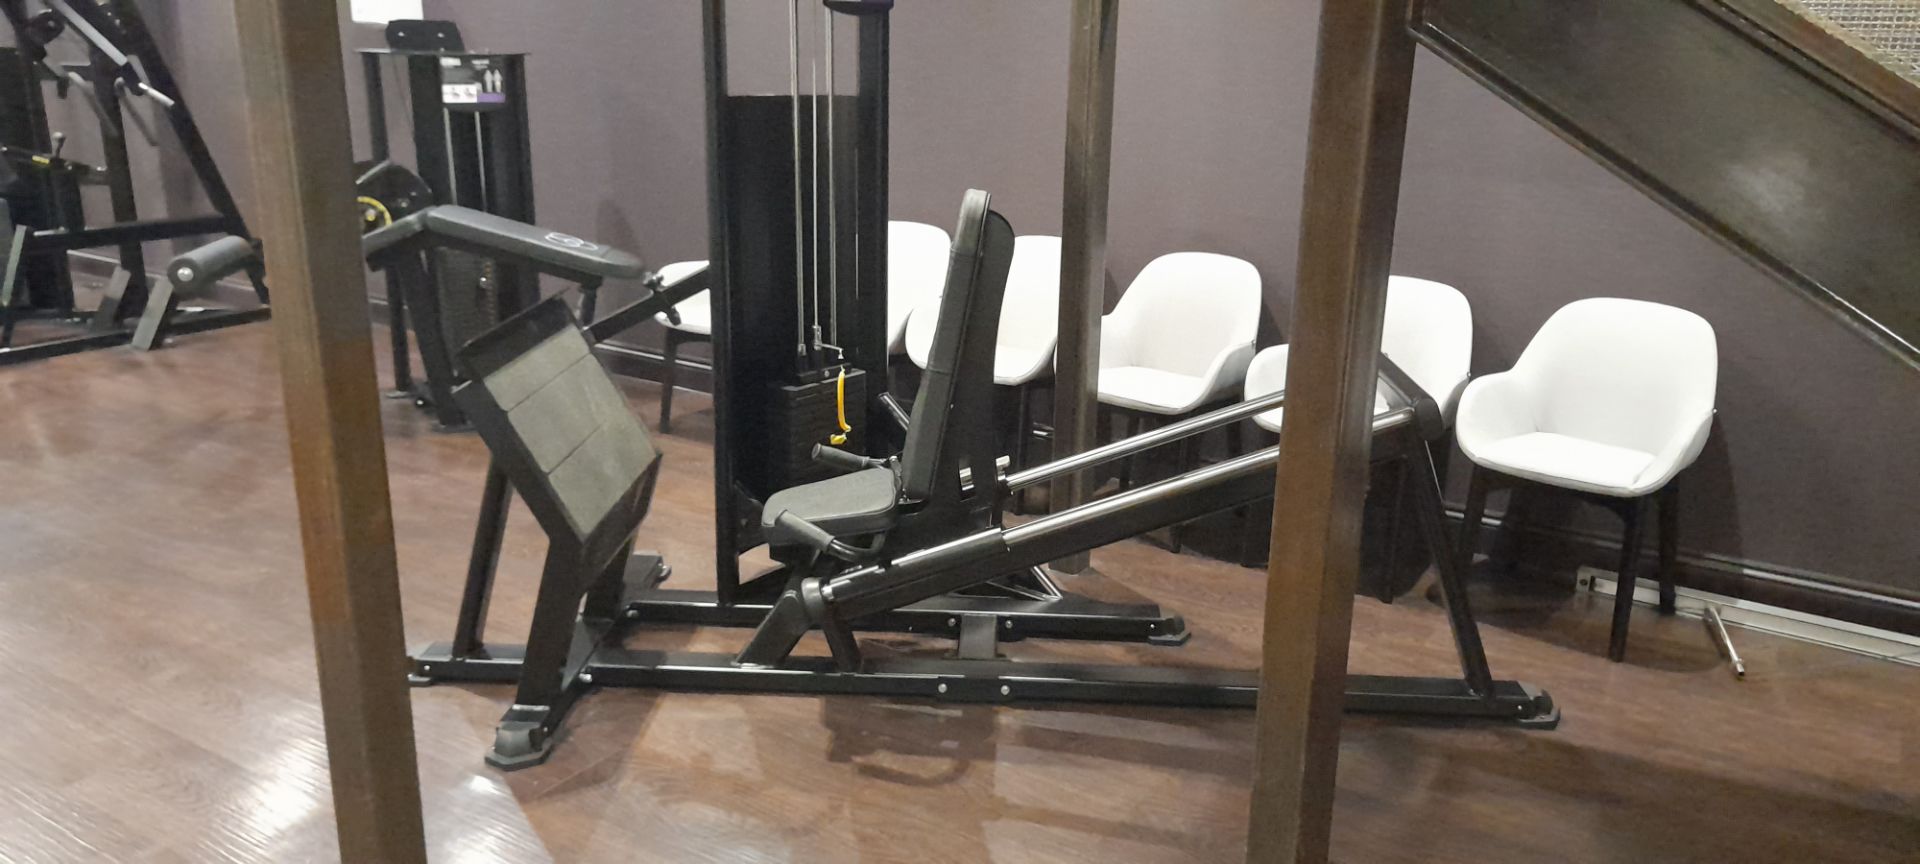 Indigo Fitness R2 leg press R001. Serial number 28402/3, 5kg to 100kg in 5kg increments –Located